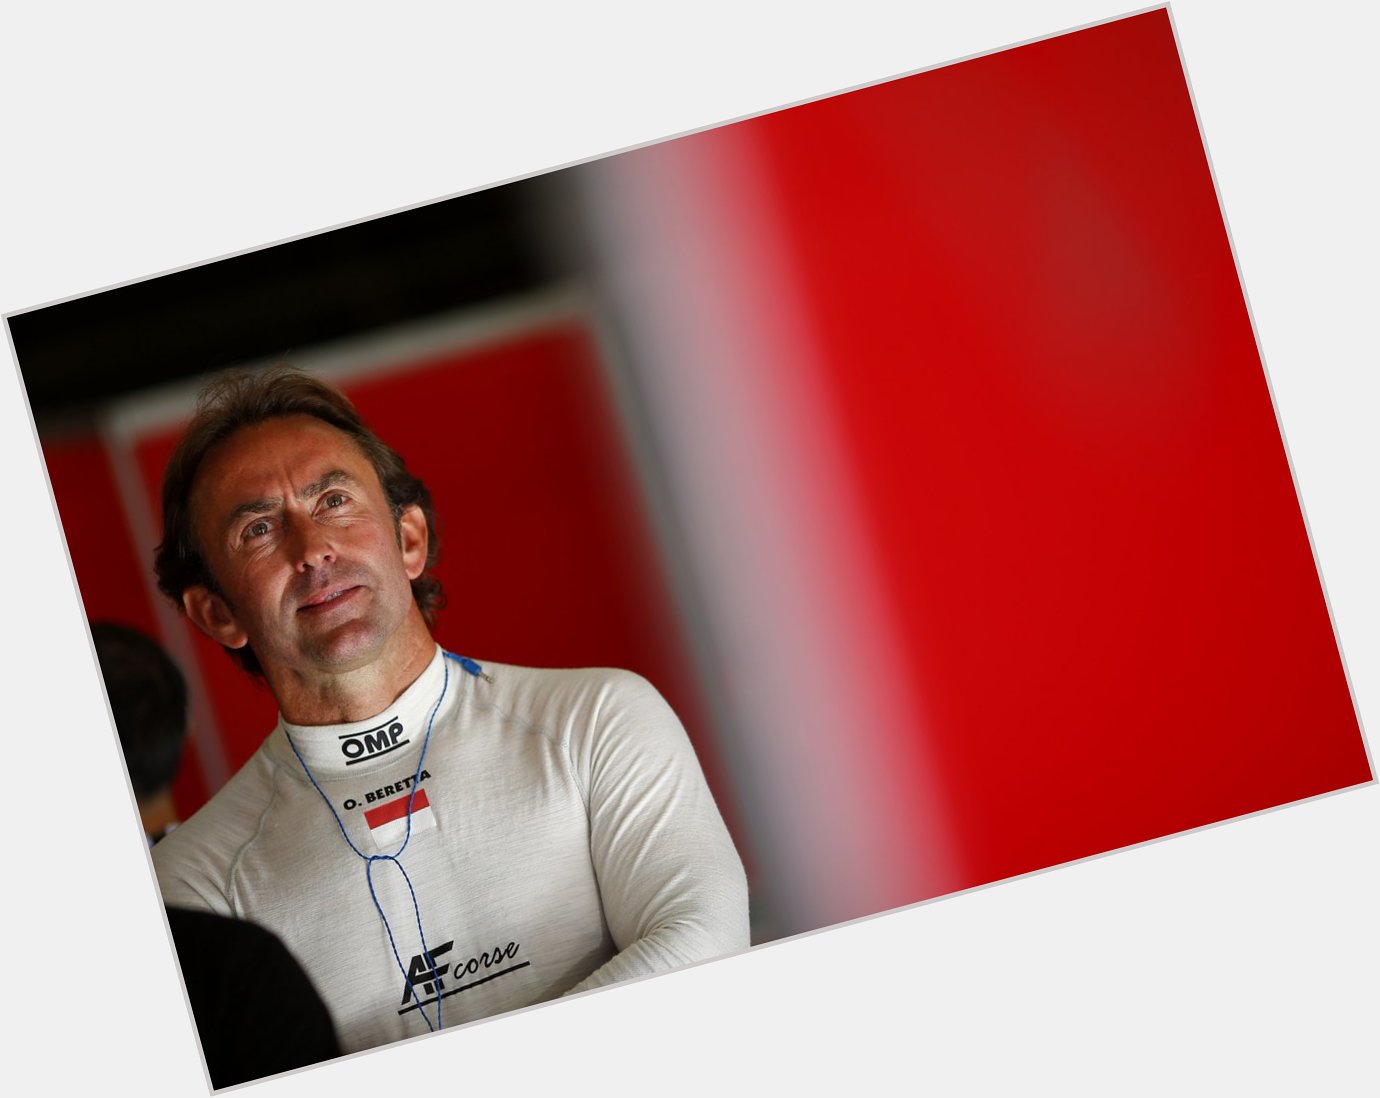 Best wishes for a Happy Birthday to one of the most successful drivers: Olivier Beretta! 